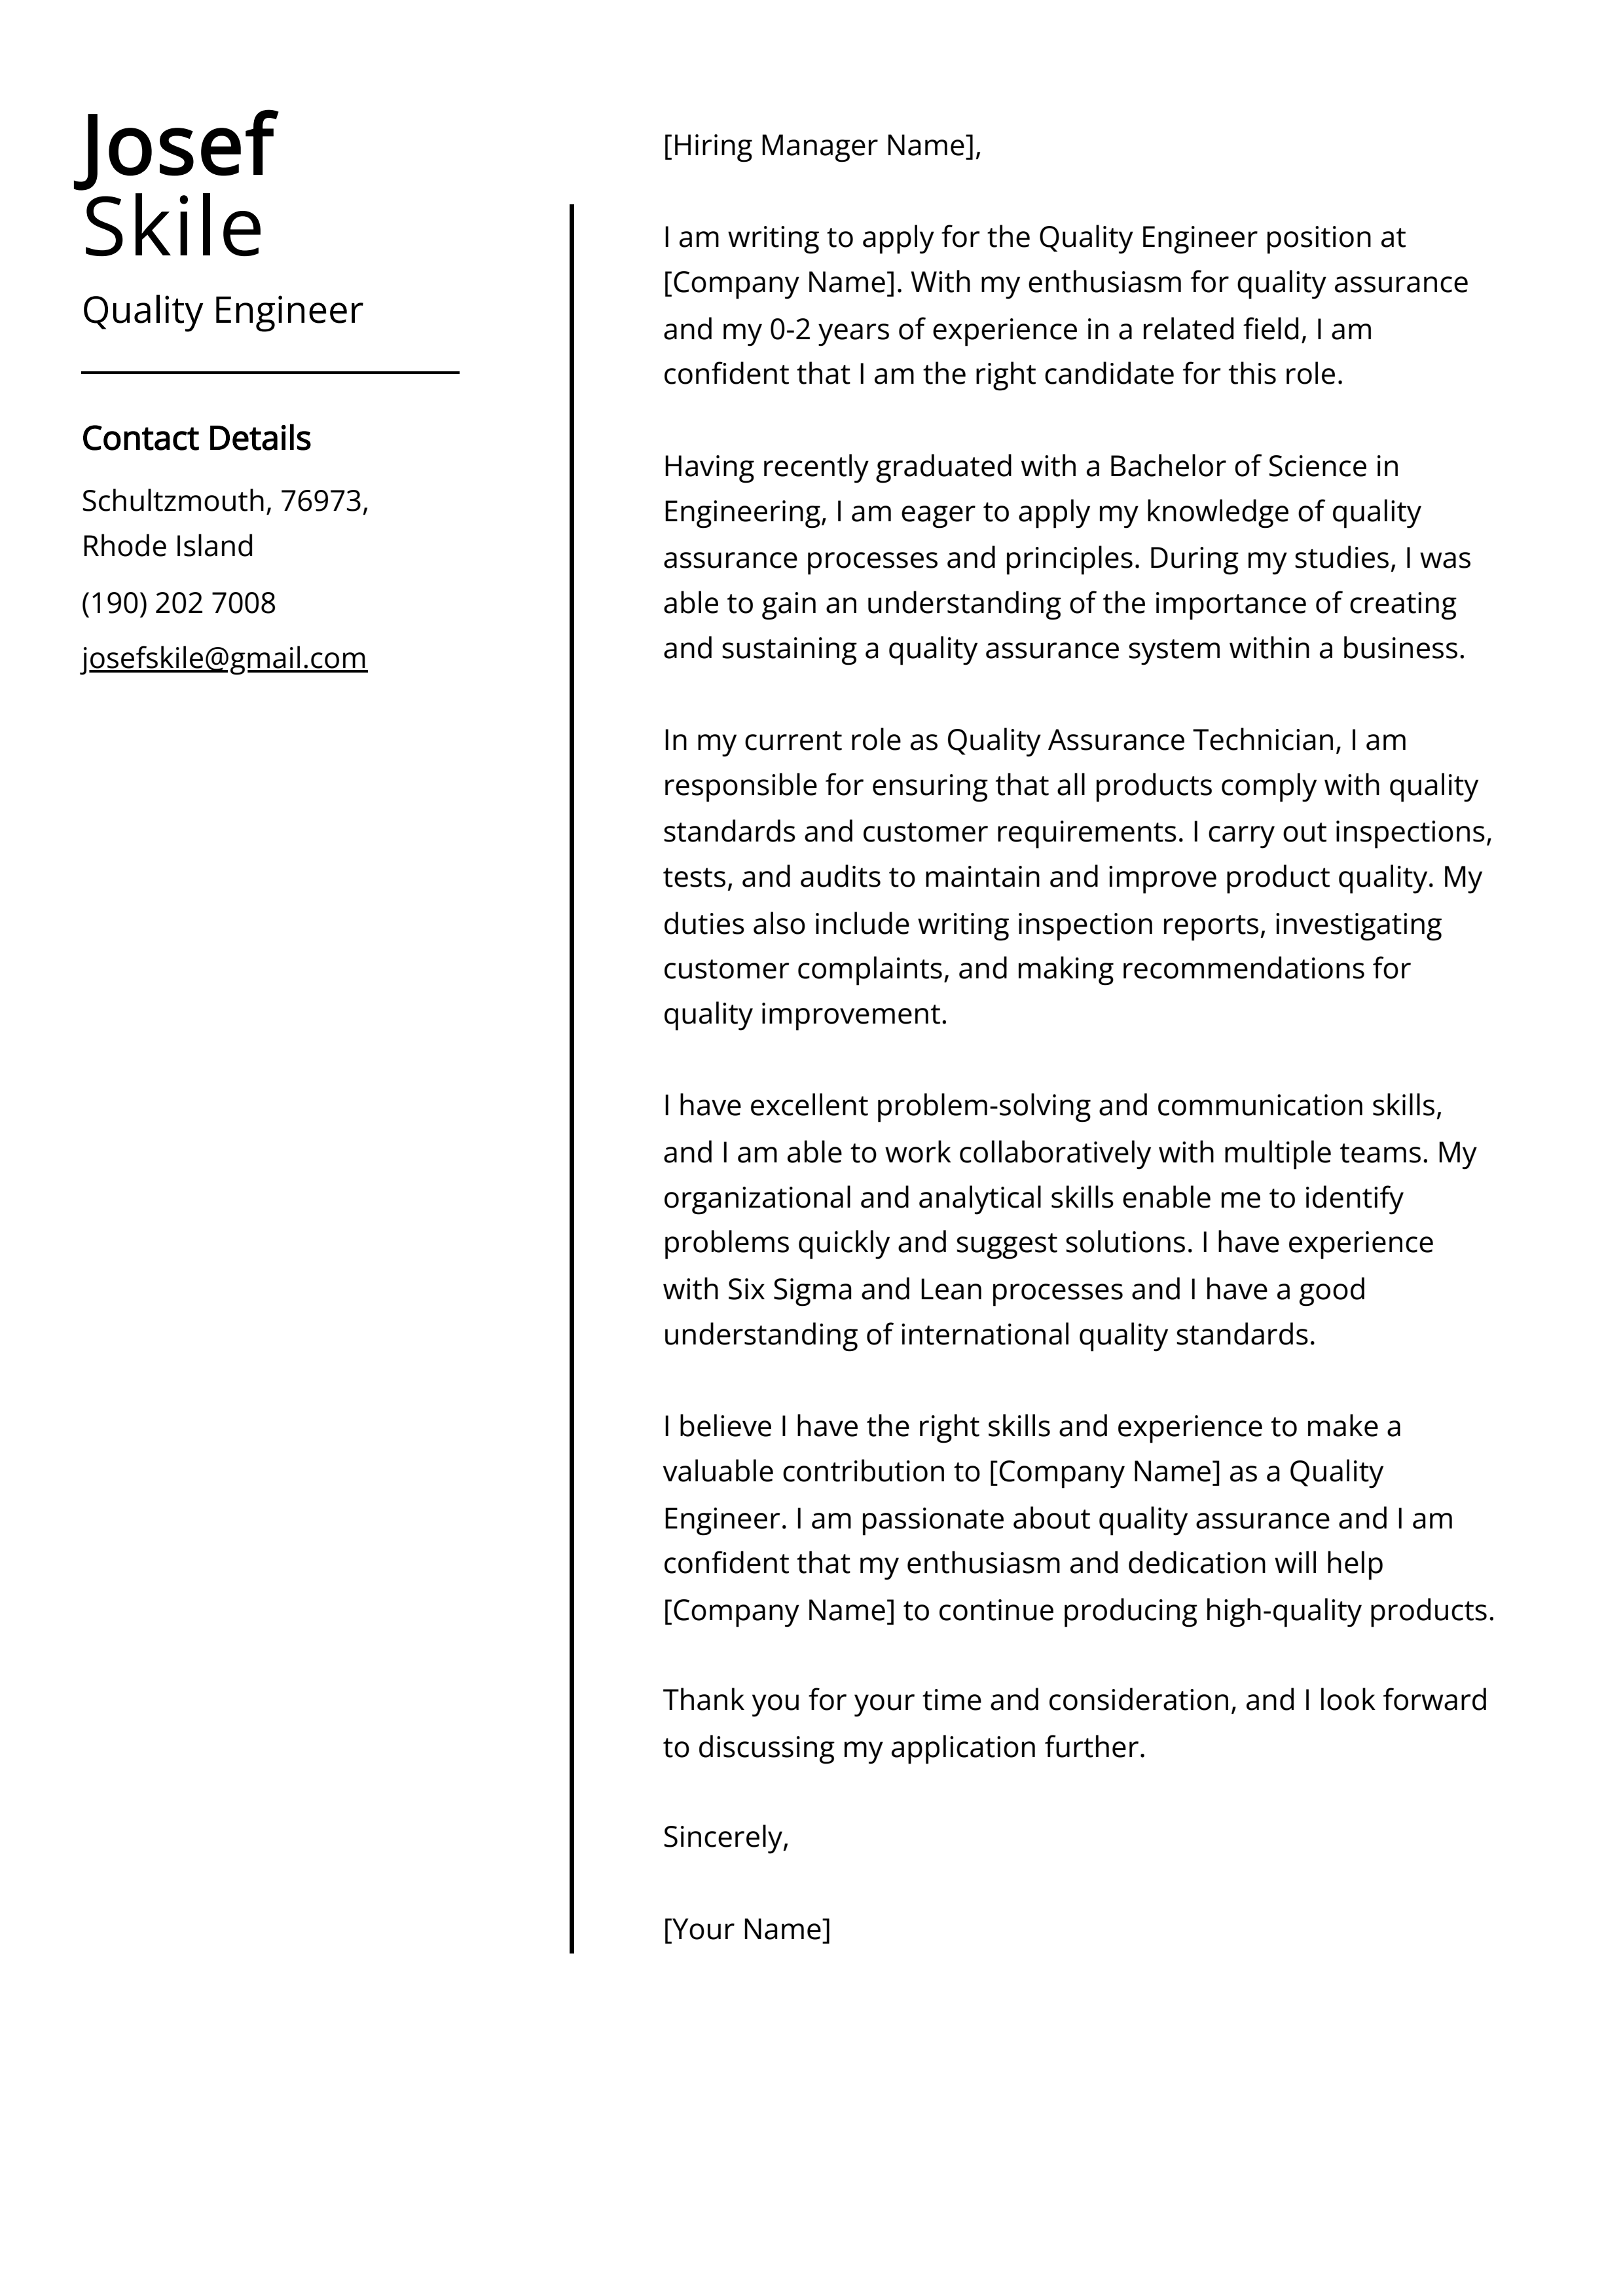 Quality Engineer Cover Letter Example